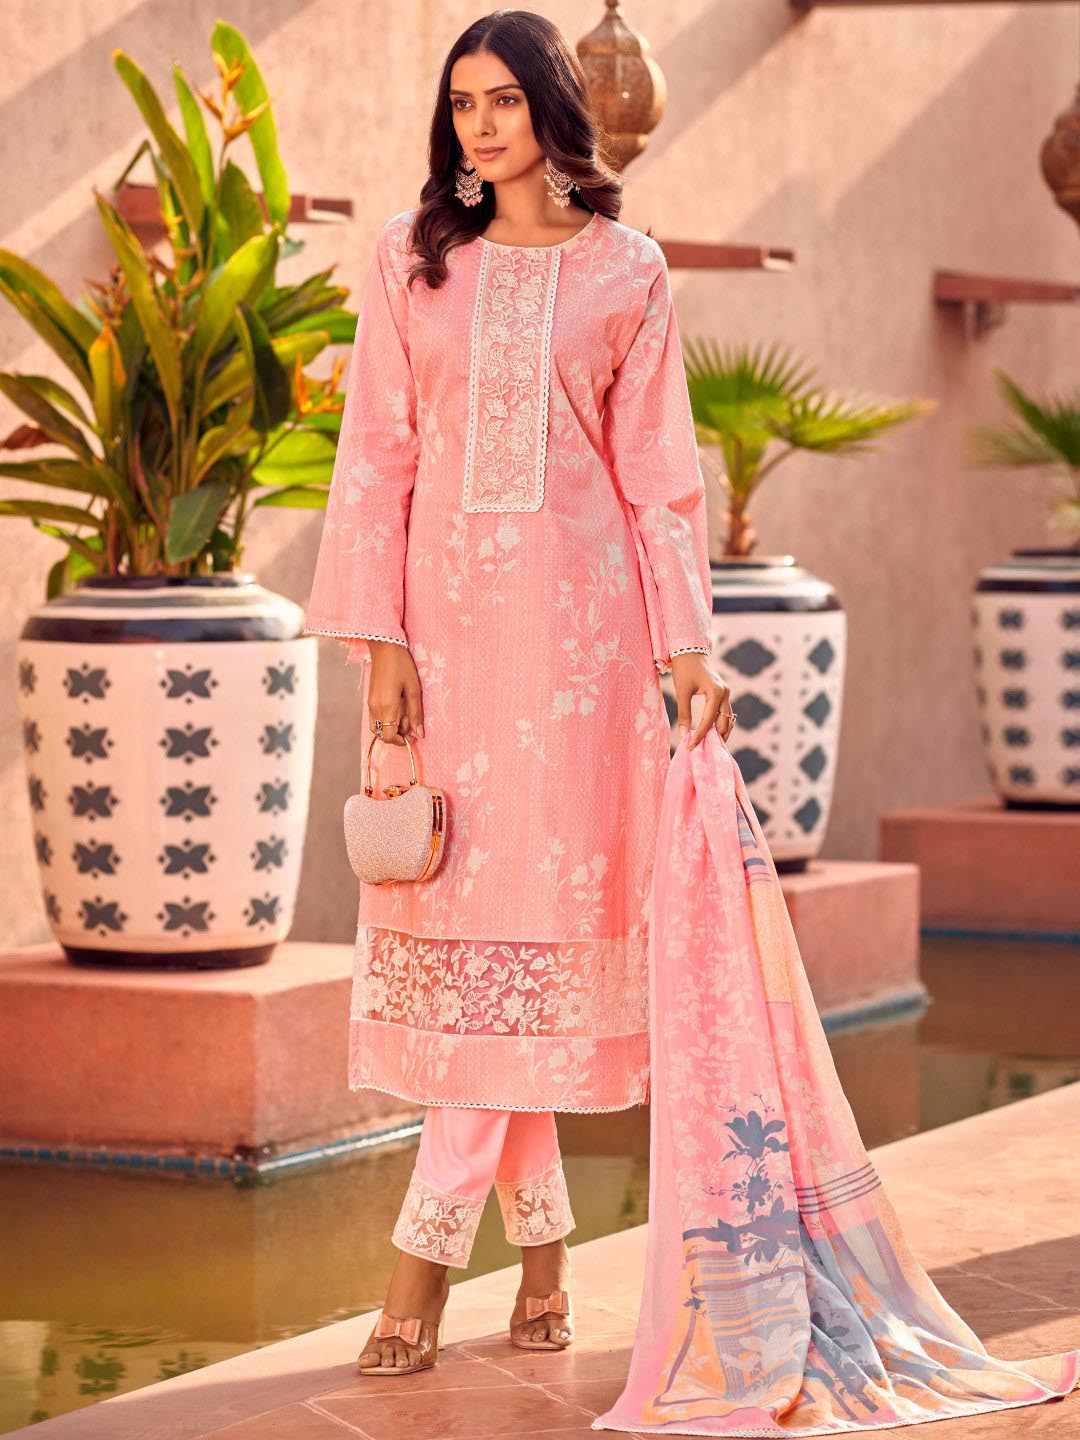 Masakali Embroidered Pink Cotton Unstitched Suit Set